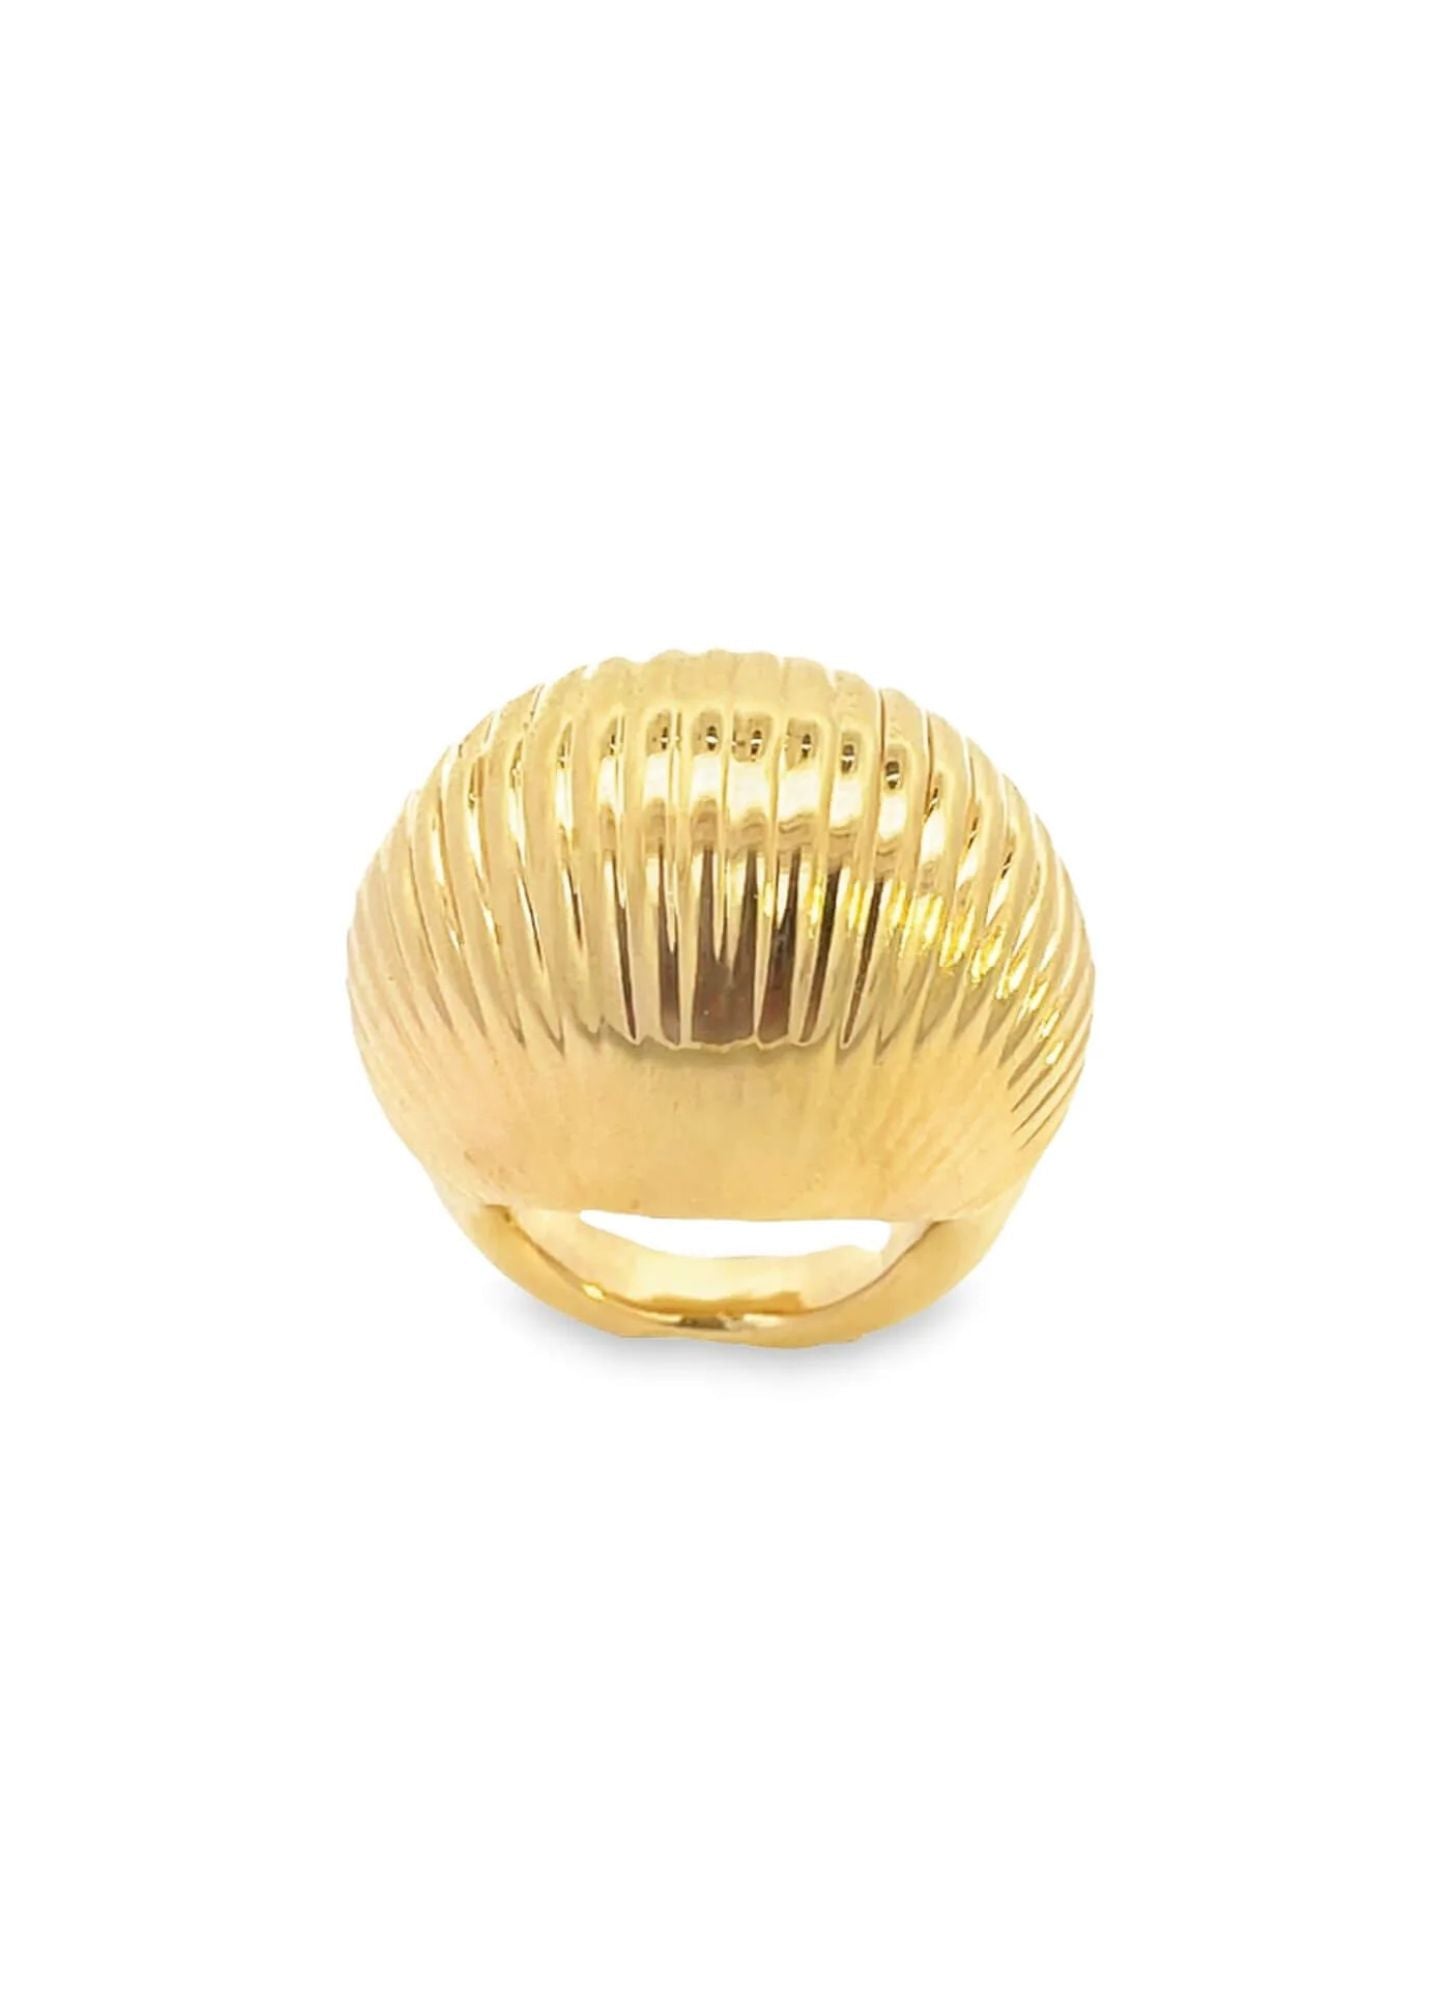 Croissant Wavy Dome Statement Ring in 18K Gold Filled from Inaury.com